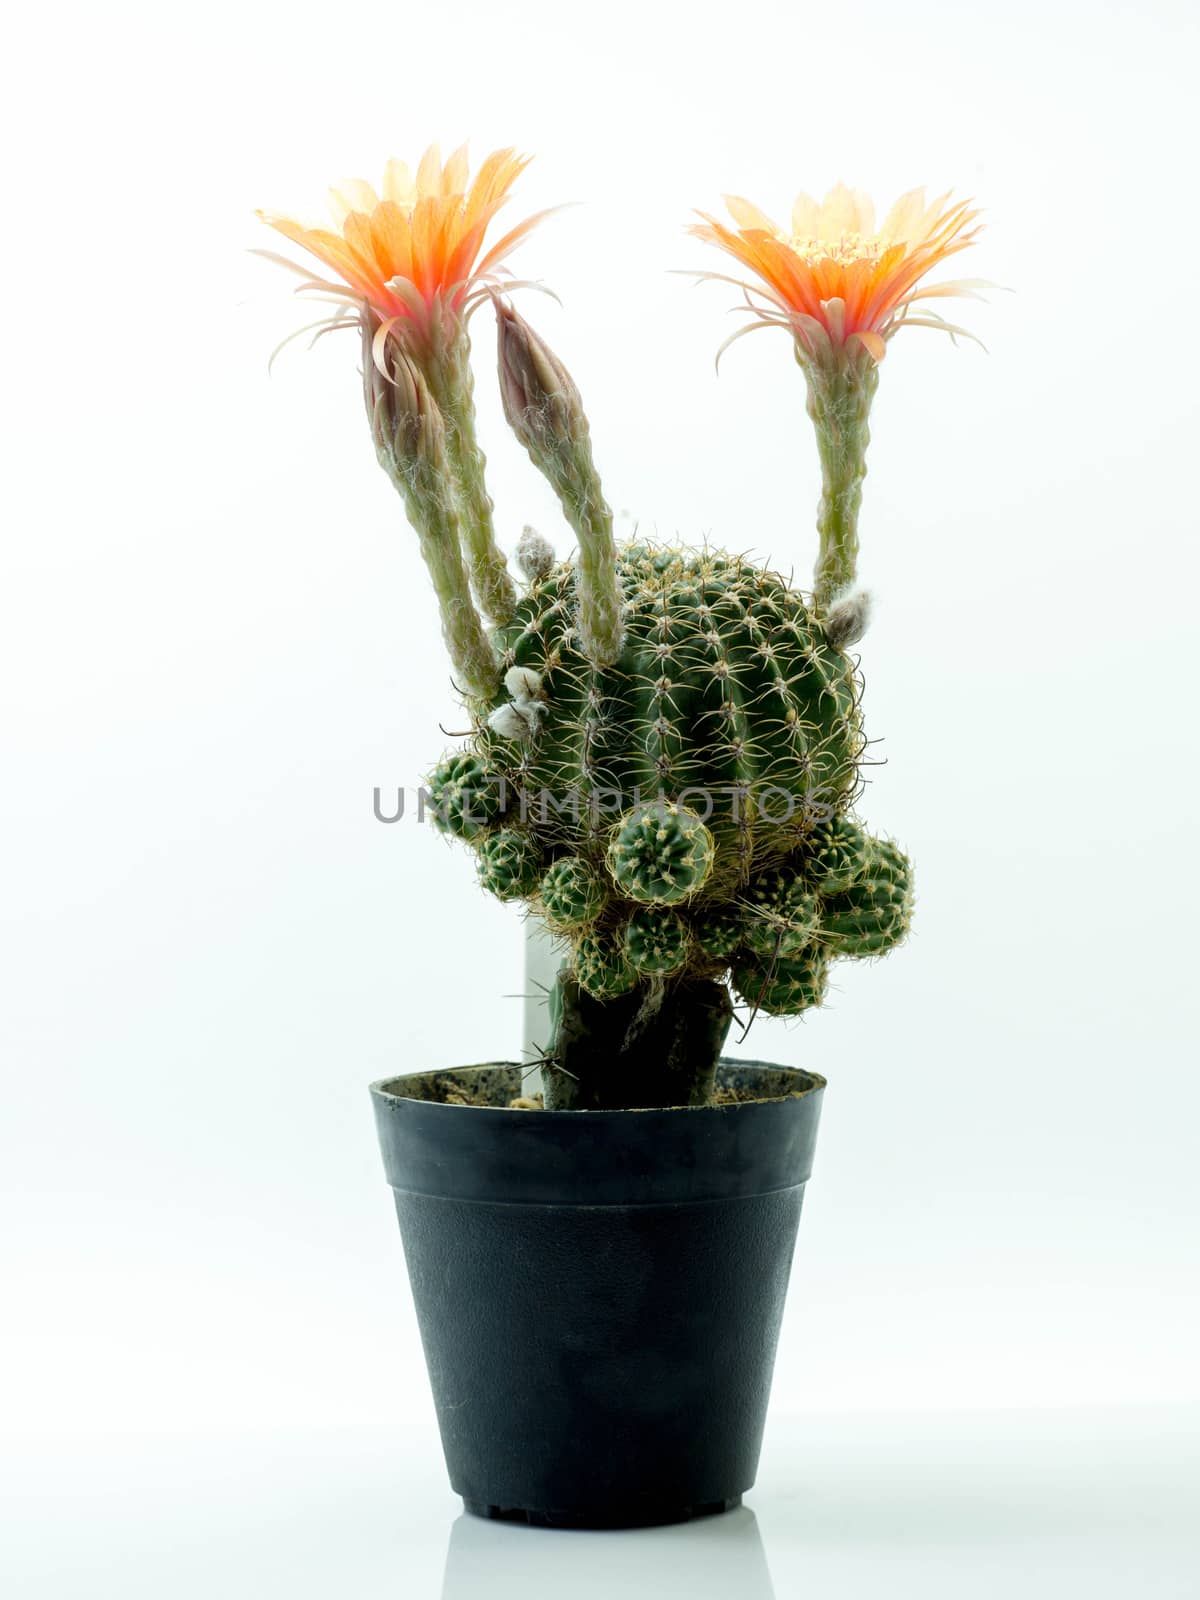 Cactus with Orange flower in a pot. Isolated on a white background. by PattyPhoto